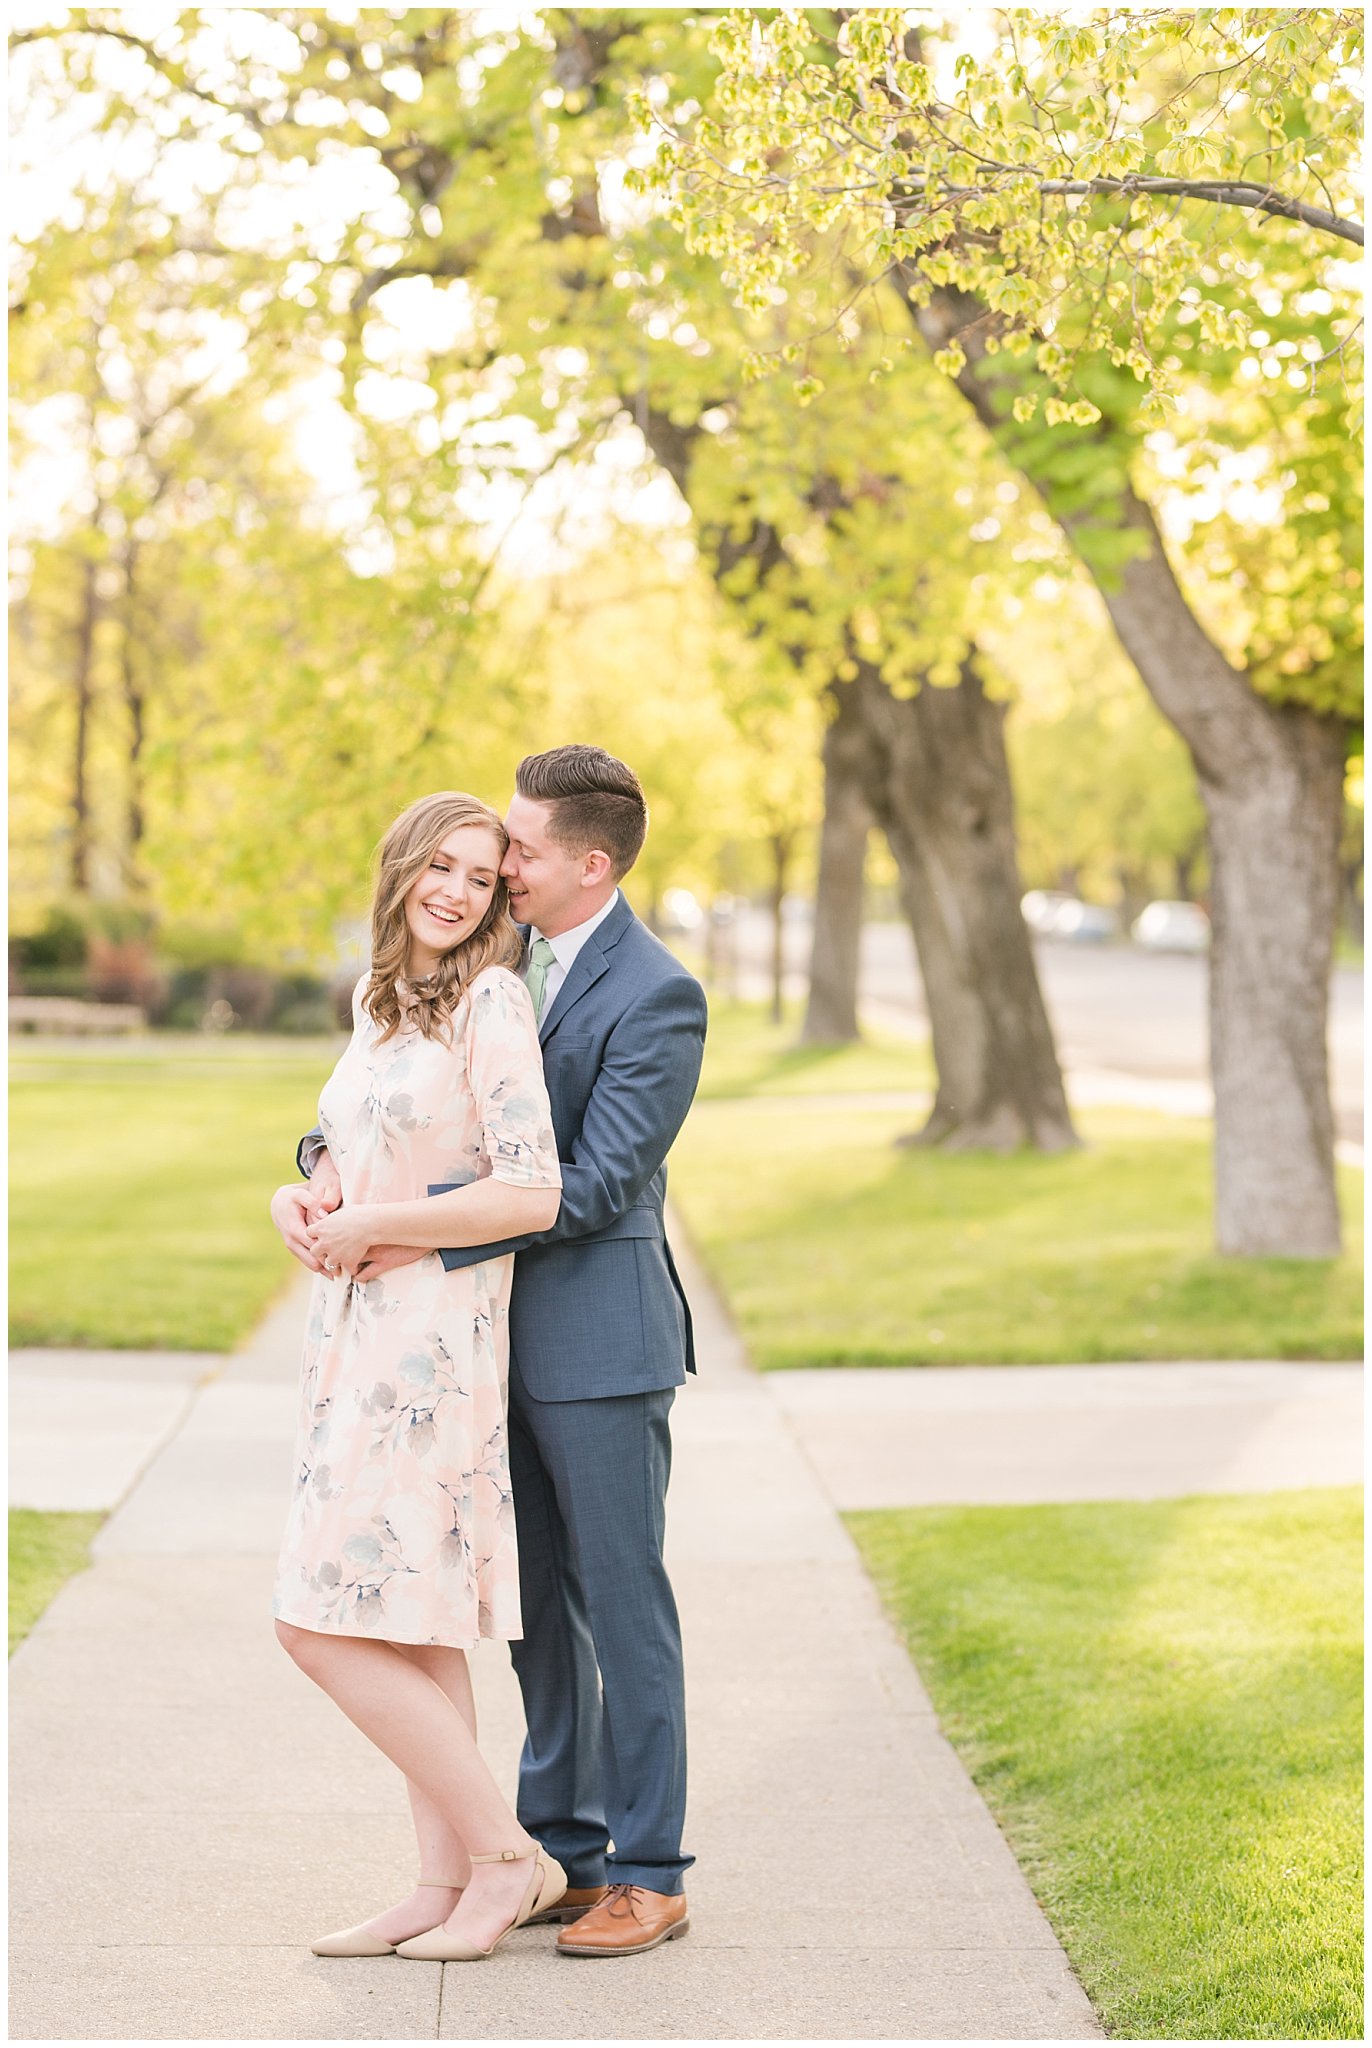 Couple dressed up in blue suit and blush dress surrounded by the city and trees in the spring | Downtown Logan and Wellsville Mountain Engagement | Jessie and Dallin Photography